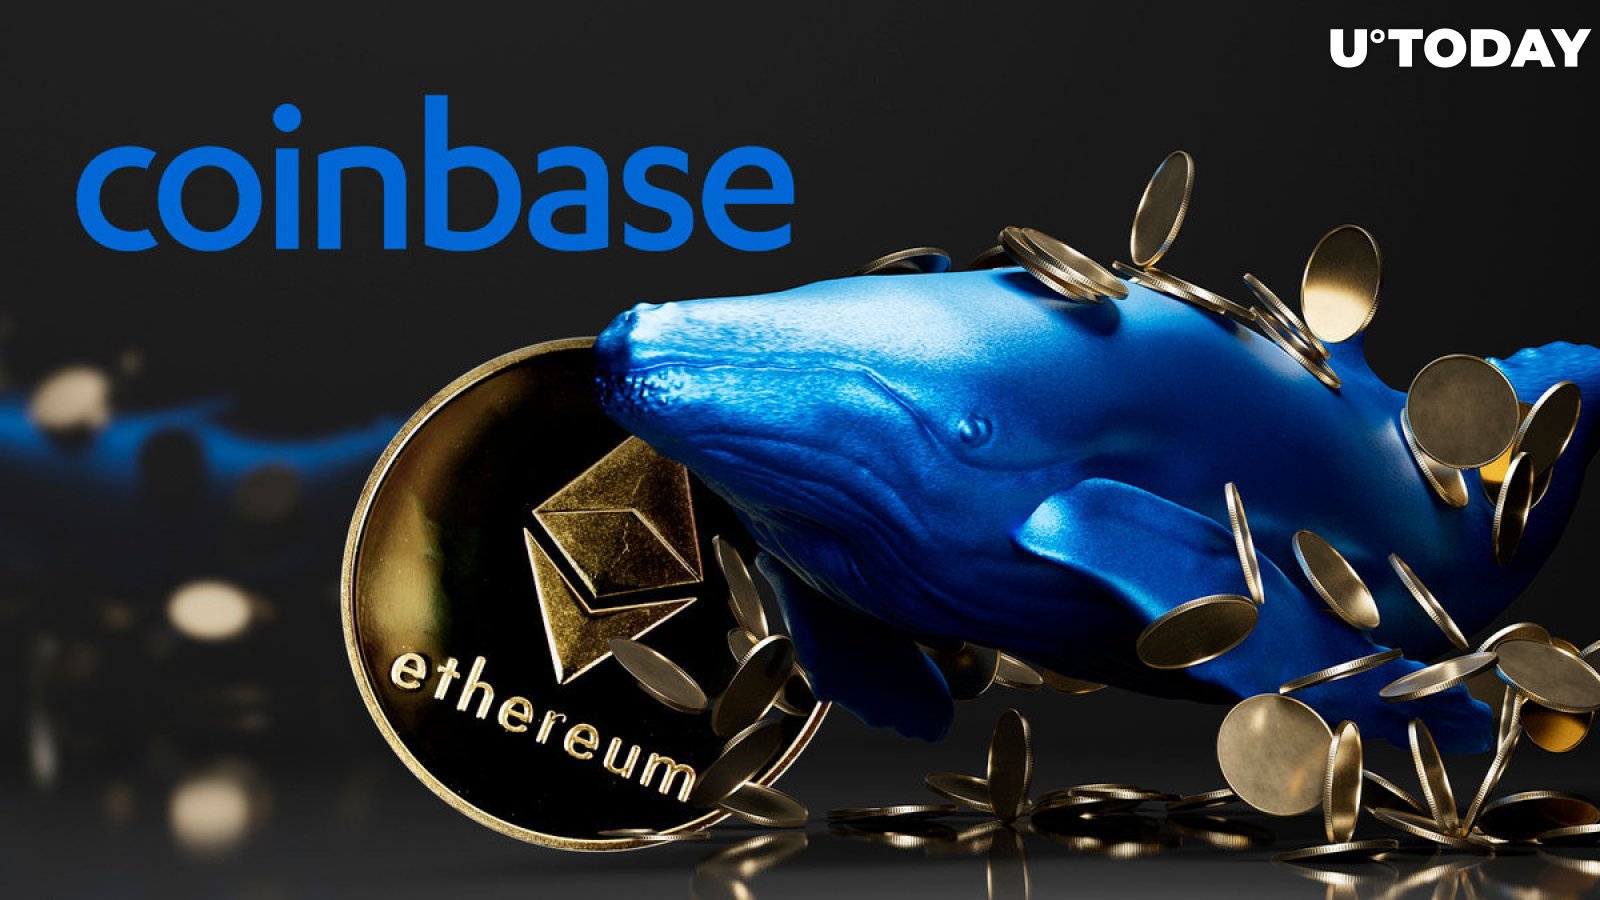 Ancient Whale Sends Millions in ETH to Coinbase – Sell-off Coming?